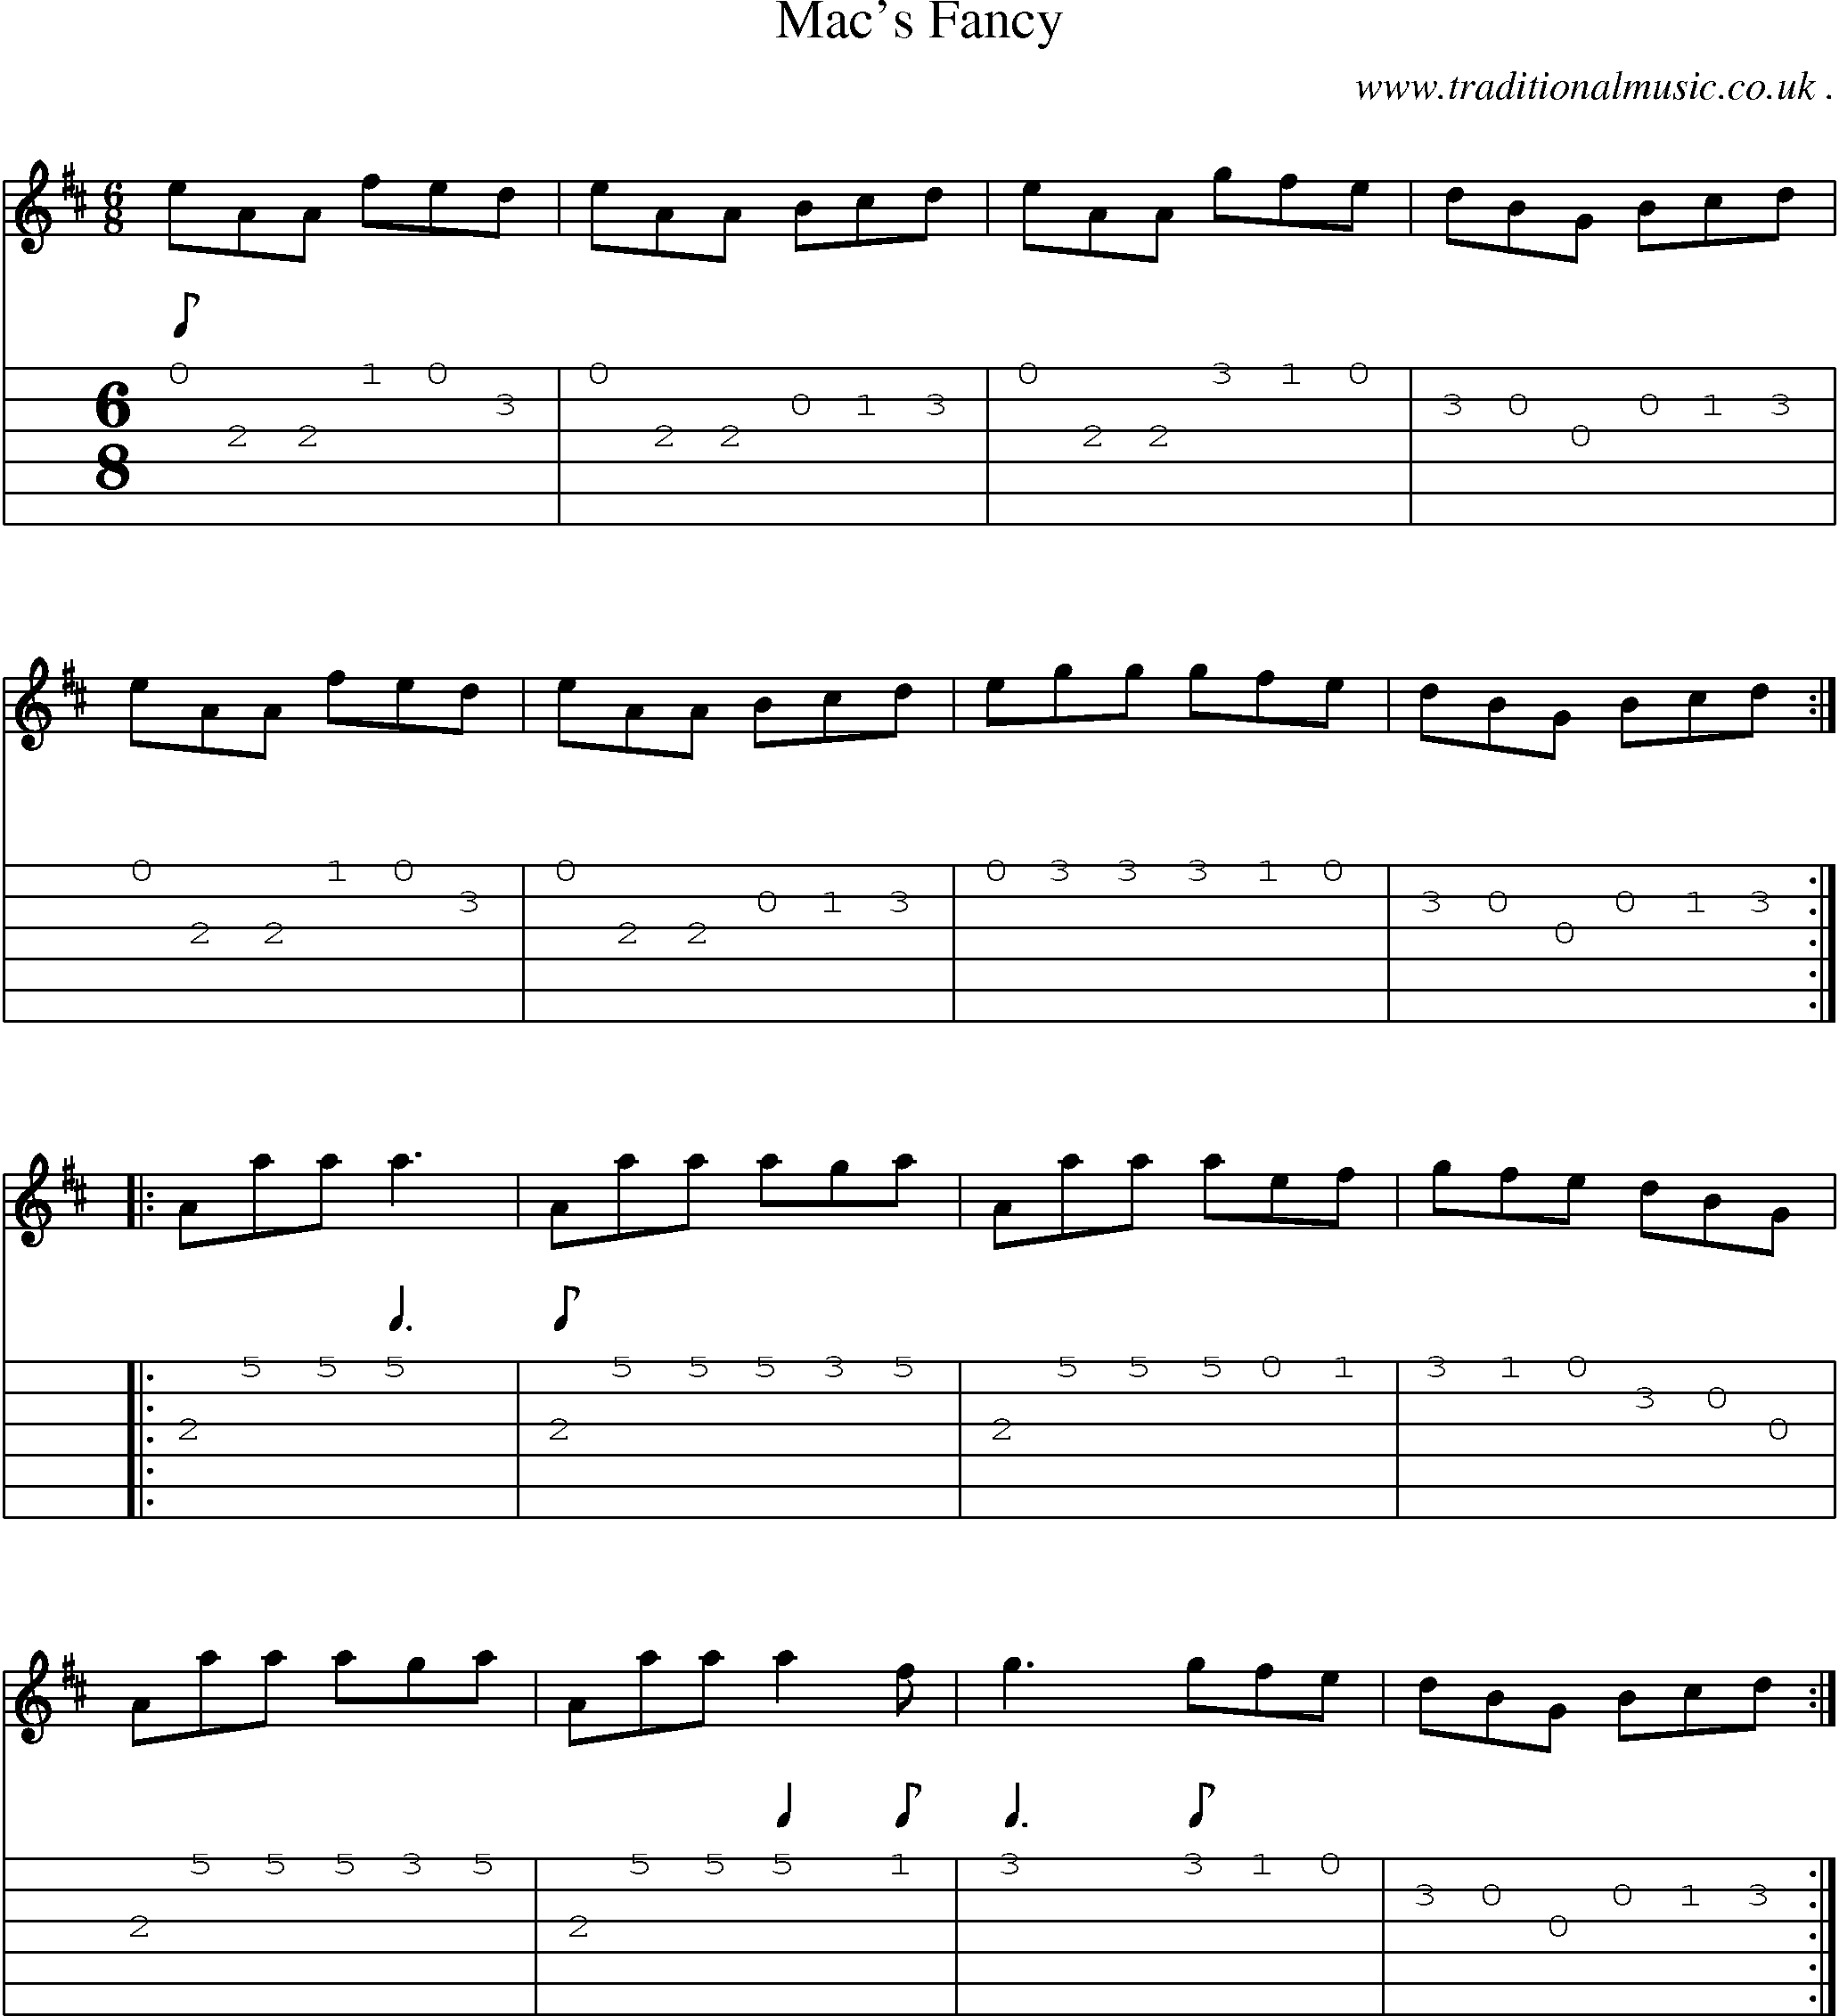 Sheet-Music and Guitar Tabs for Macs Fancy